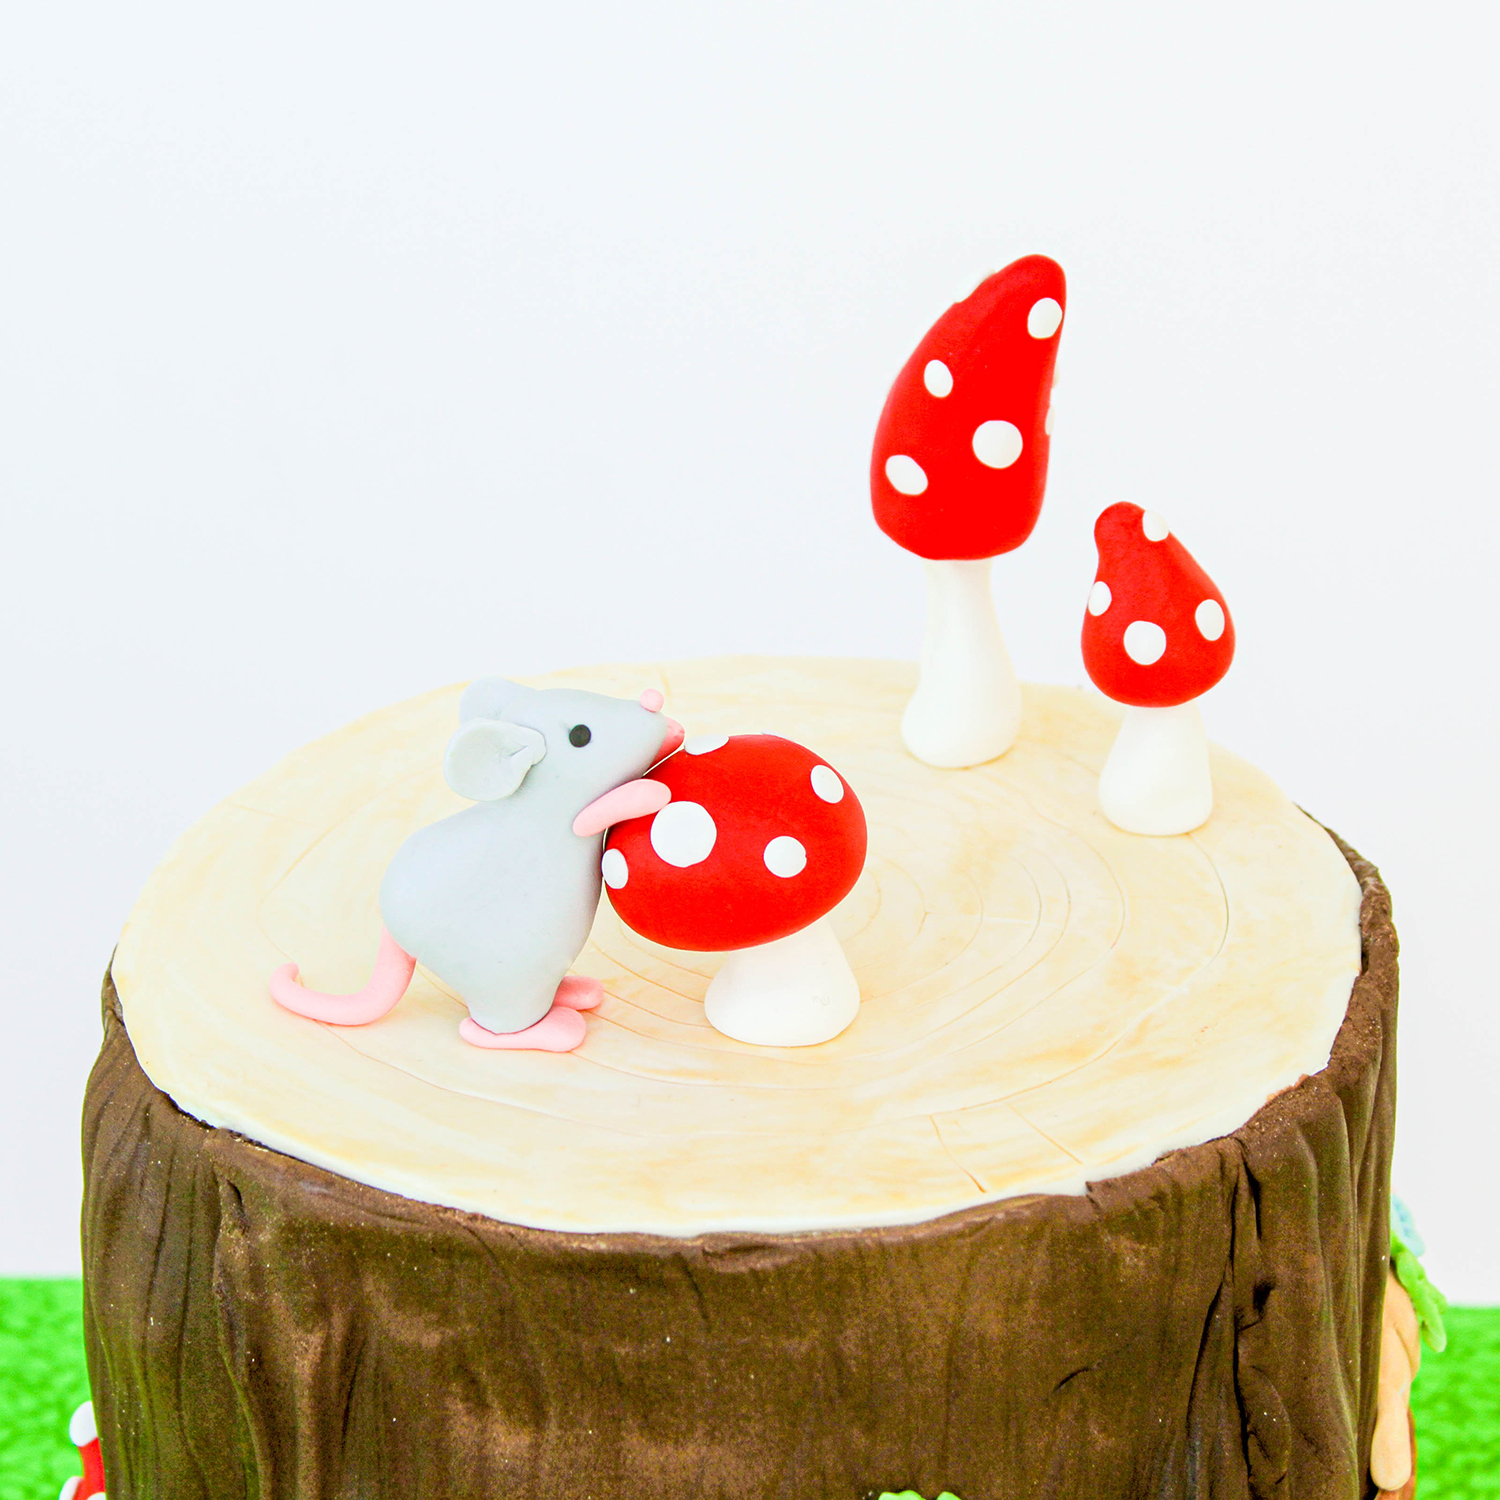 Top of the tree trunk house with a field mouse and 3 red mushrooms covered in white polka dots